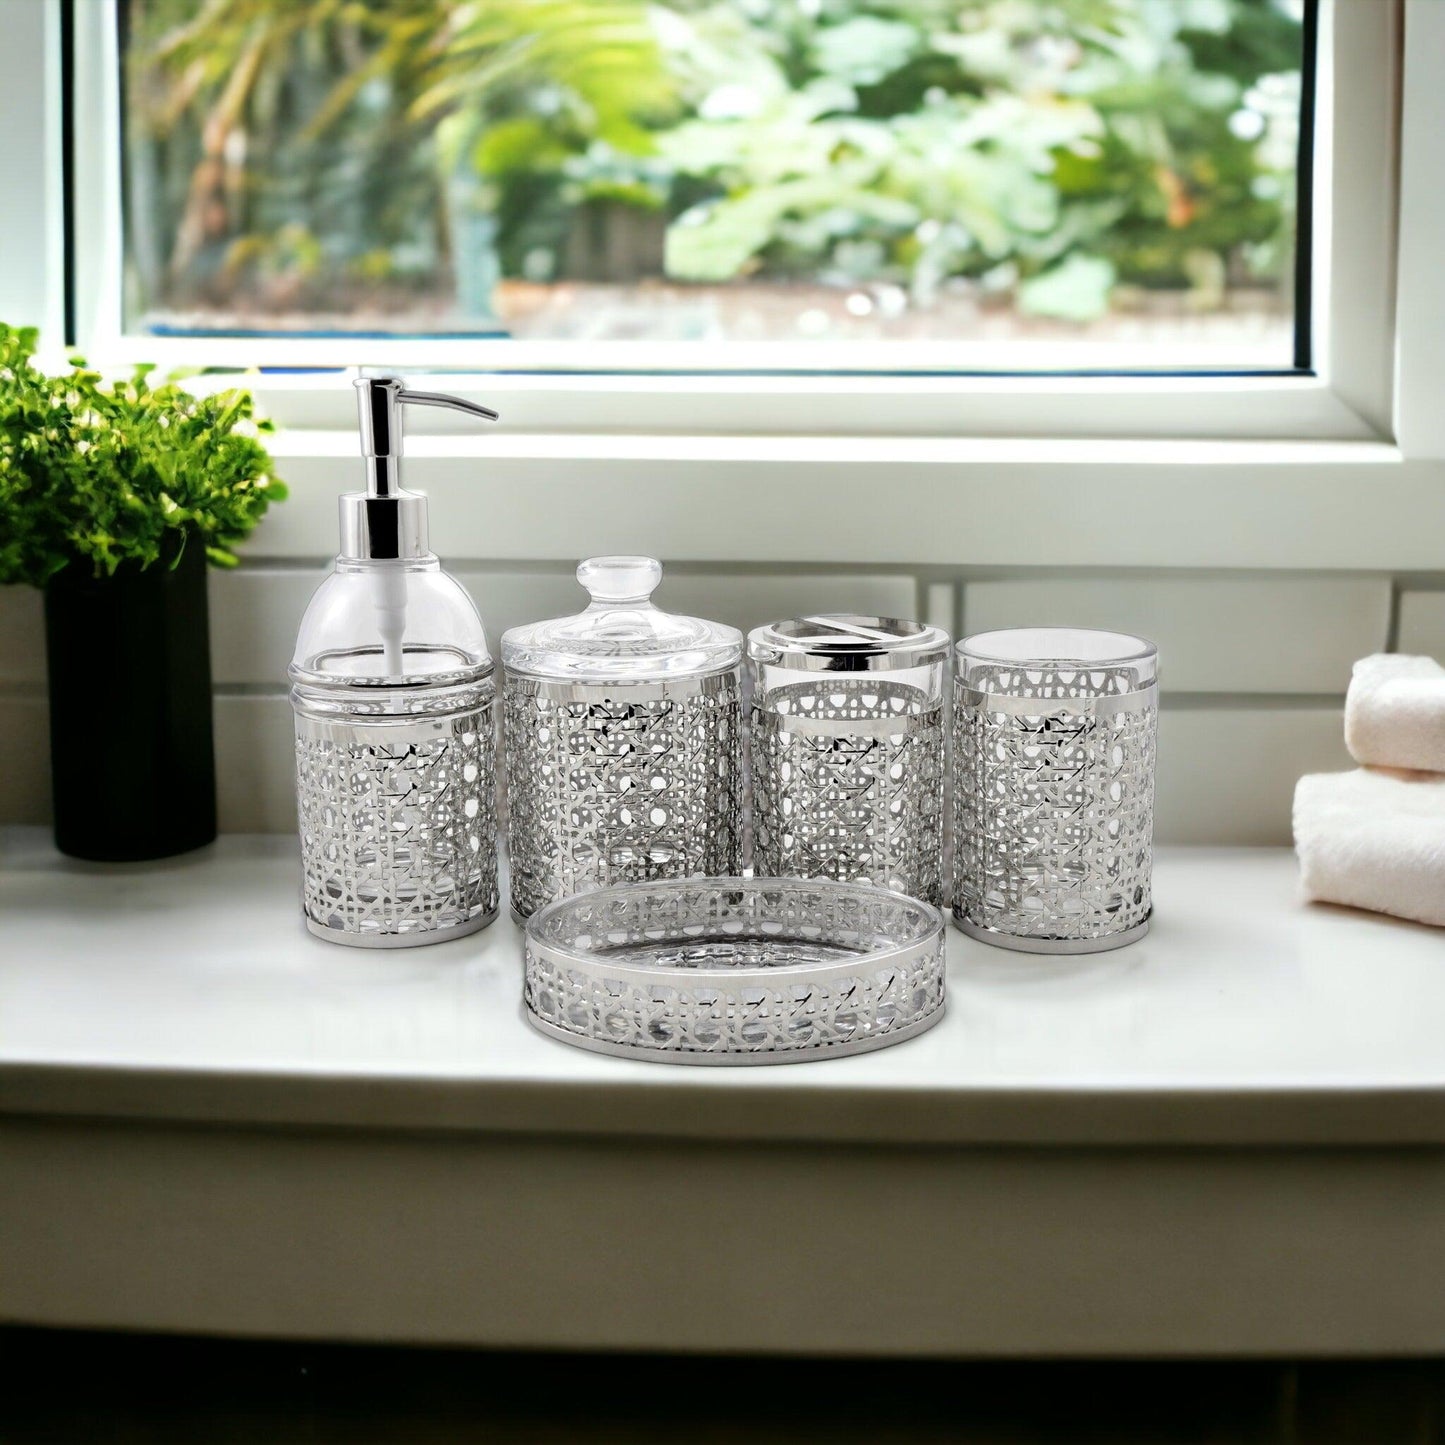 5 Piece Bathroom Set of Glass with Metal Accents - Nature Home Decor